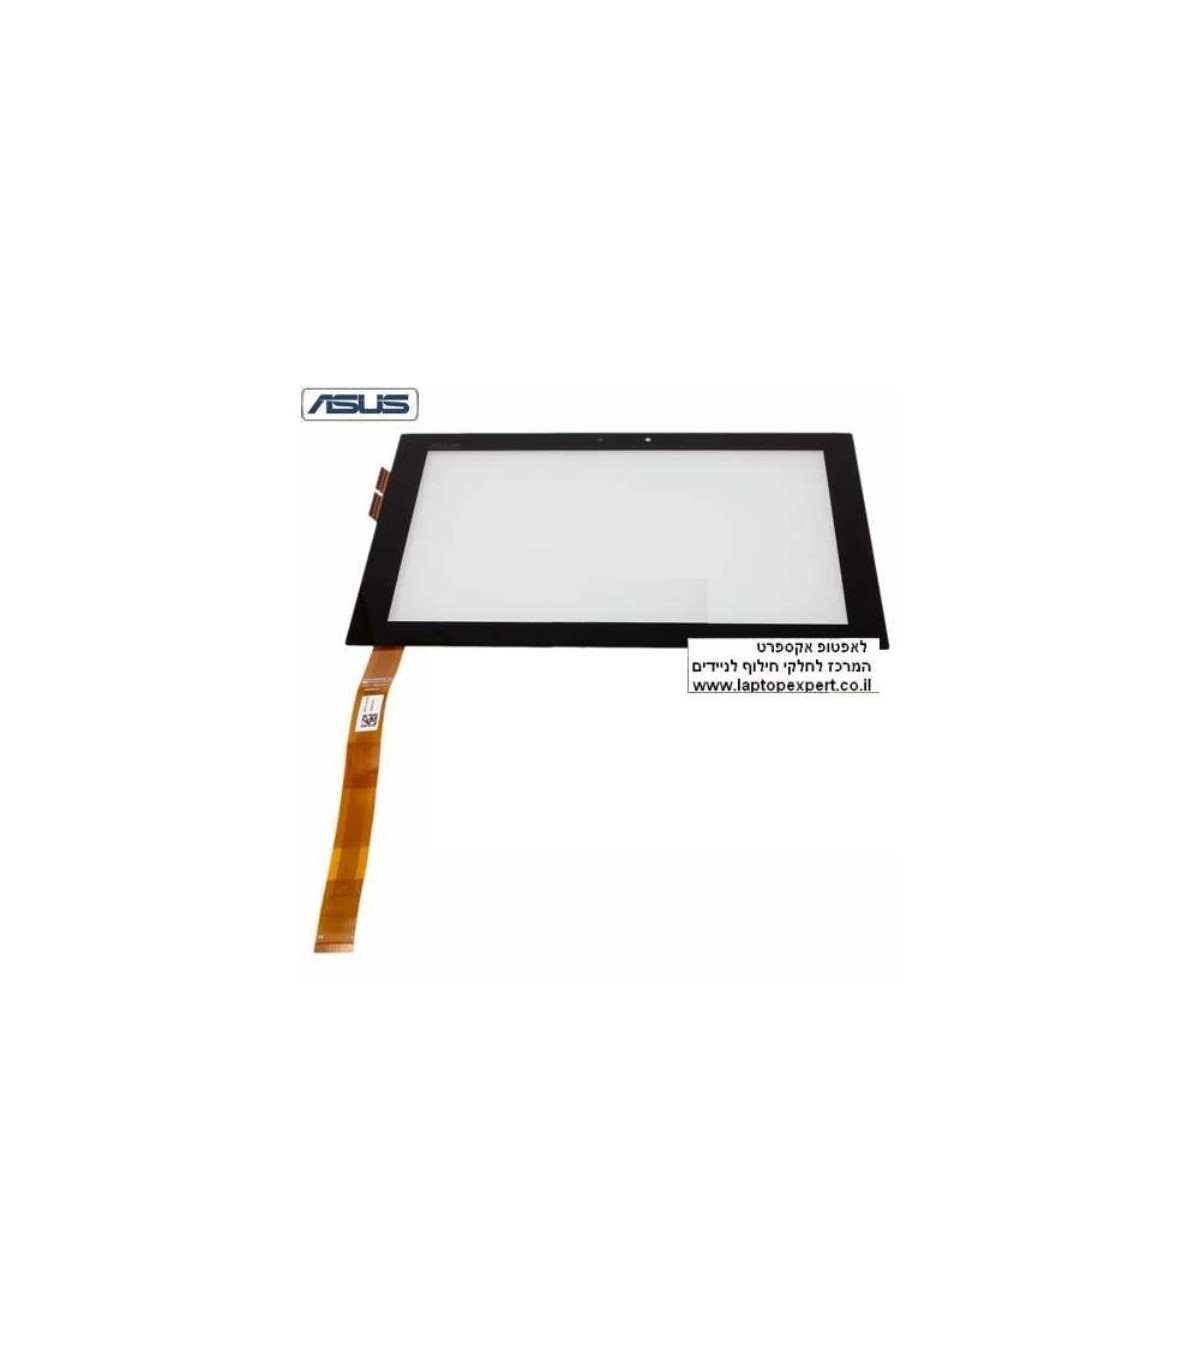 arch Labe champion מסך מגע (דיגיטייזר - זכוכית) לאסוס טאבלט Asus Eee Pad Transformer TF101  Touch Screen Digitizer Glass Replacement